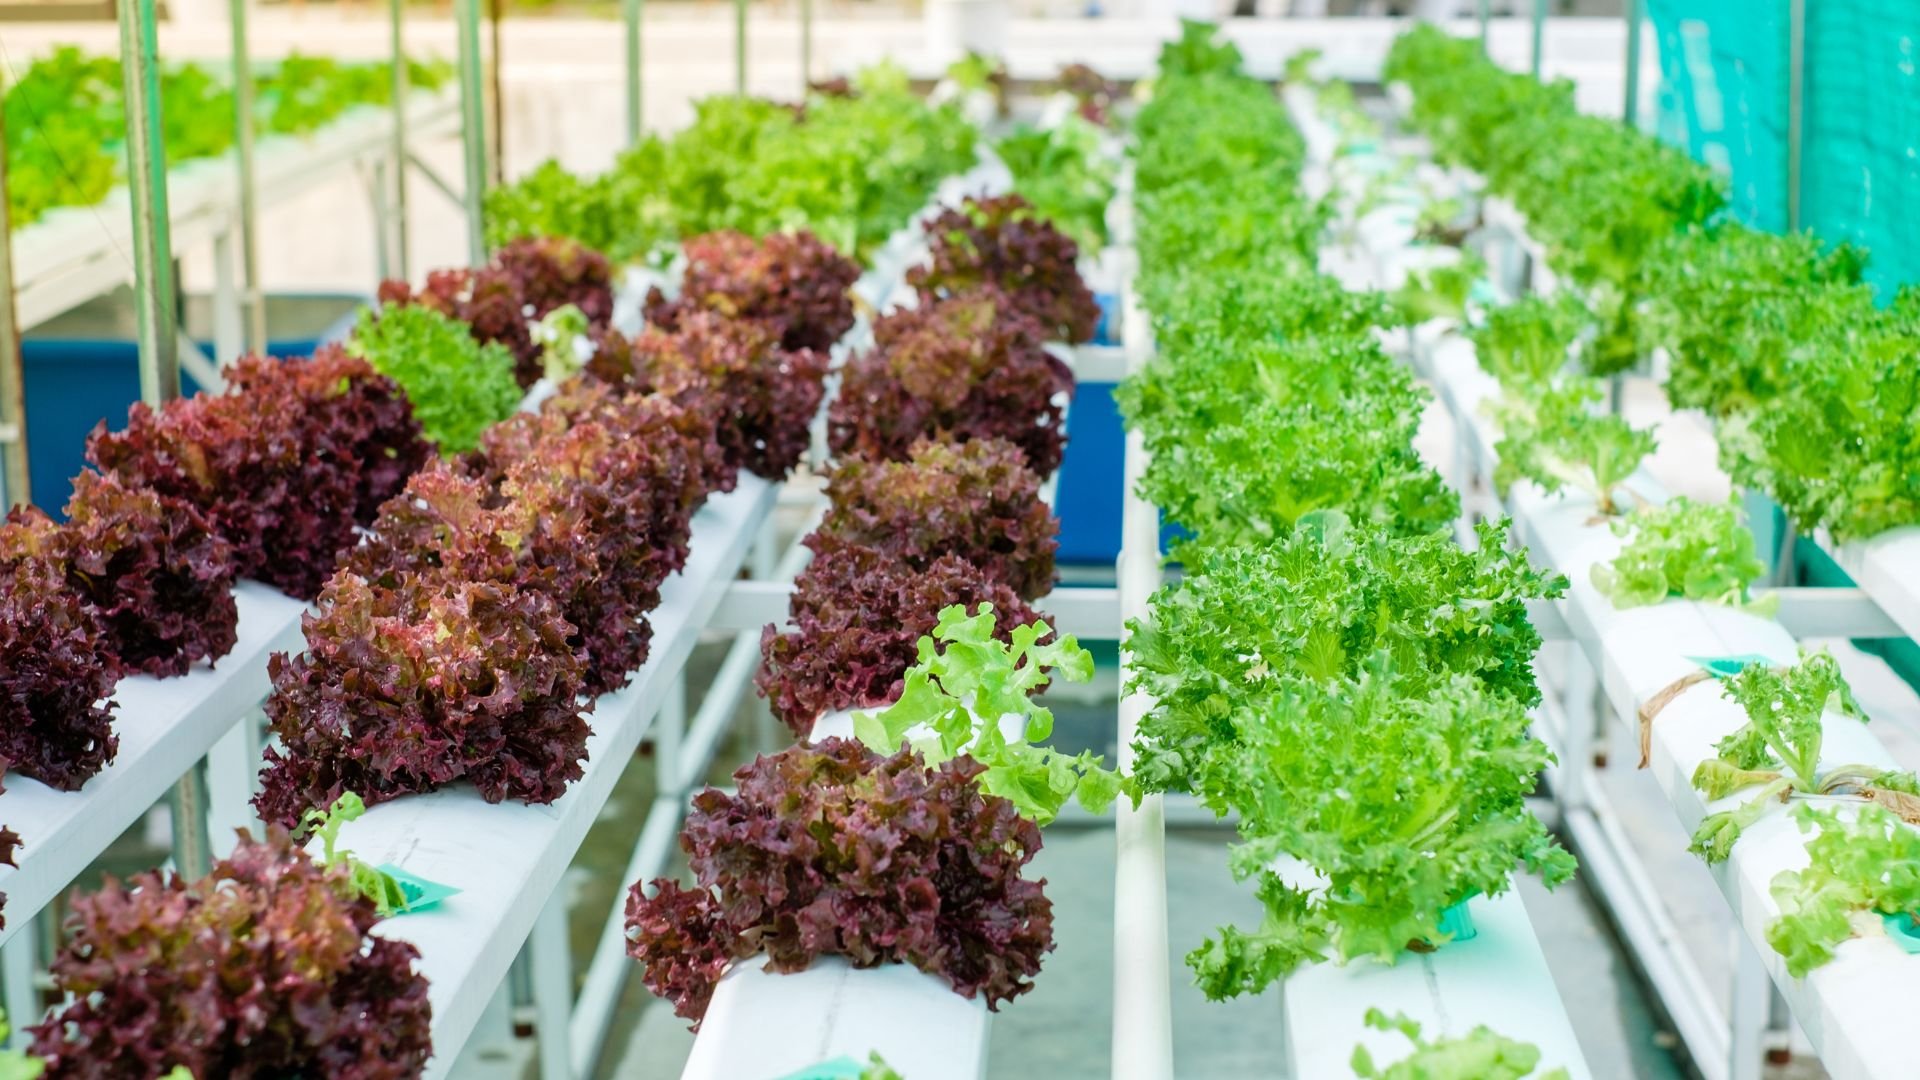 % Uncover the secrets to successful roof-top hydroponic gardening with these helpful tips and advice!